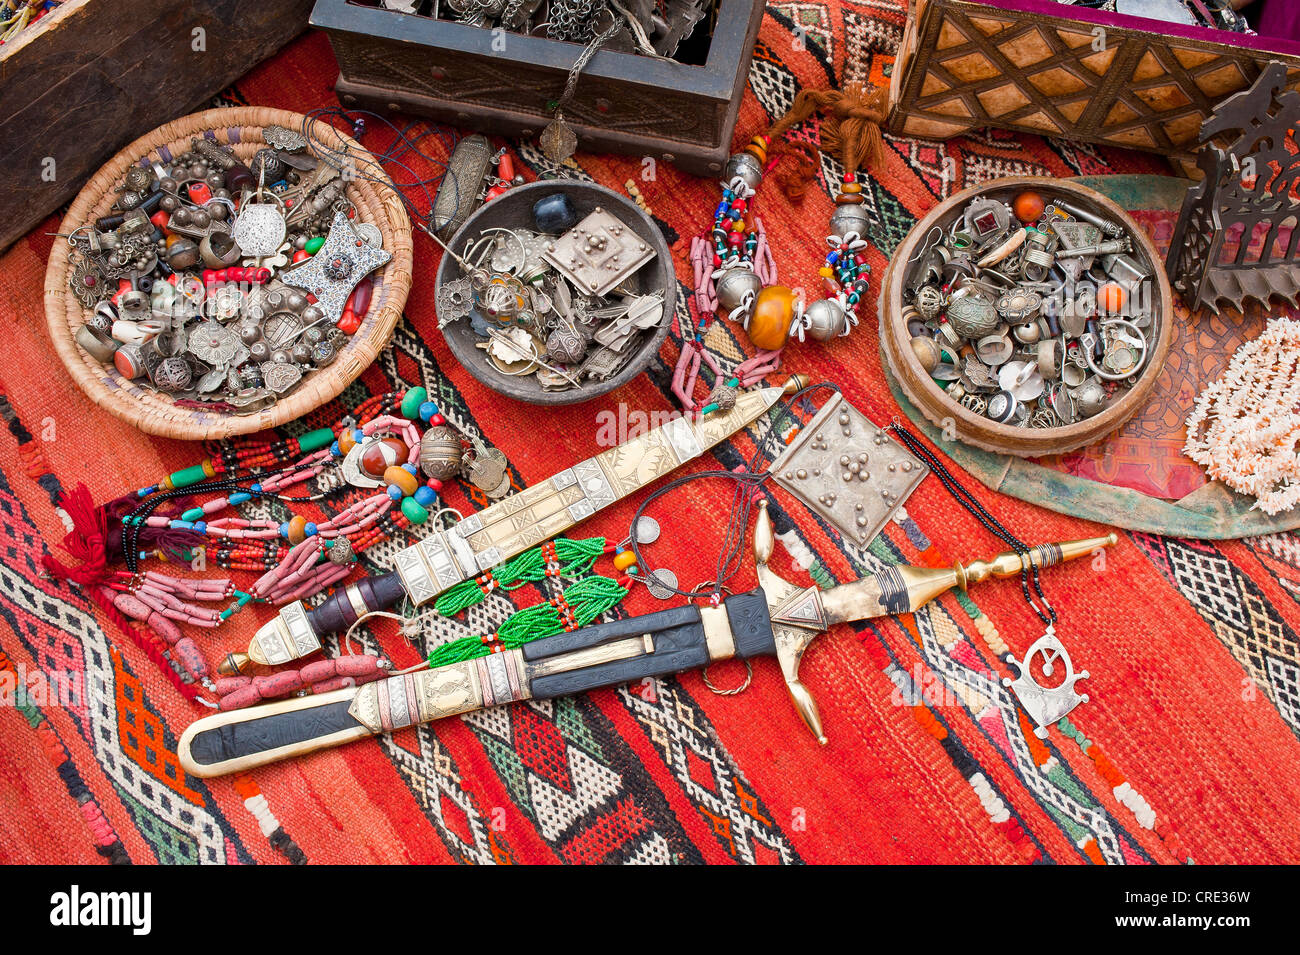 Oriental jewellery, small treasure chests and ornate Touareg knives are spread on a carpet in a souk or bazaar, Morocco, Africa Stock Photo